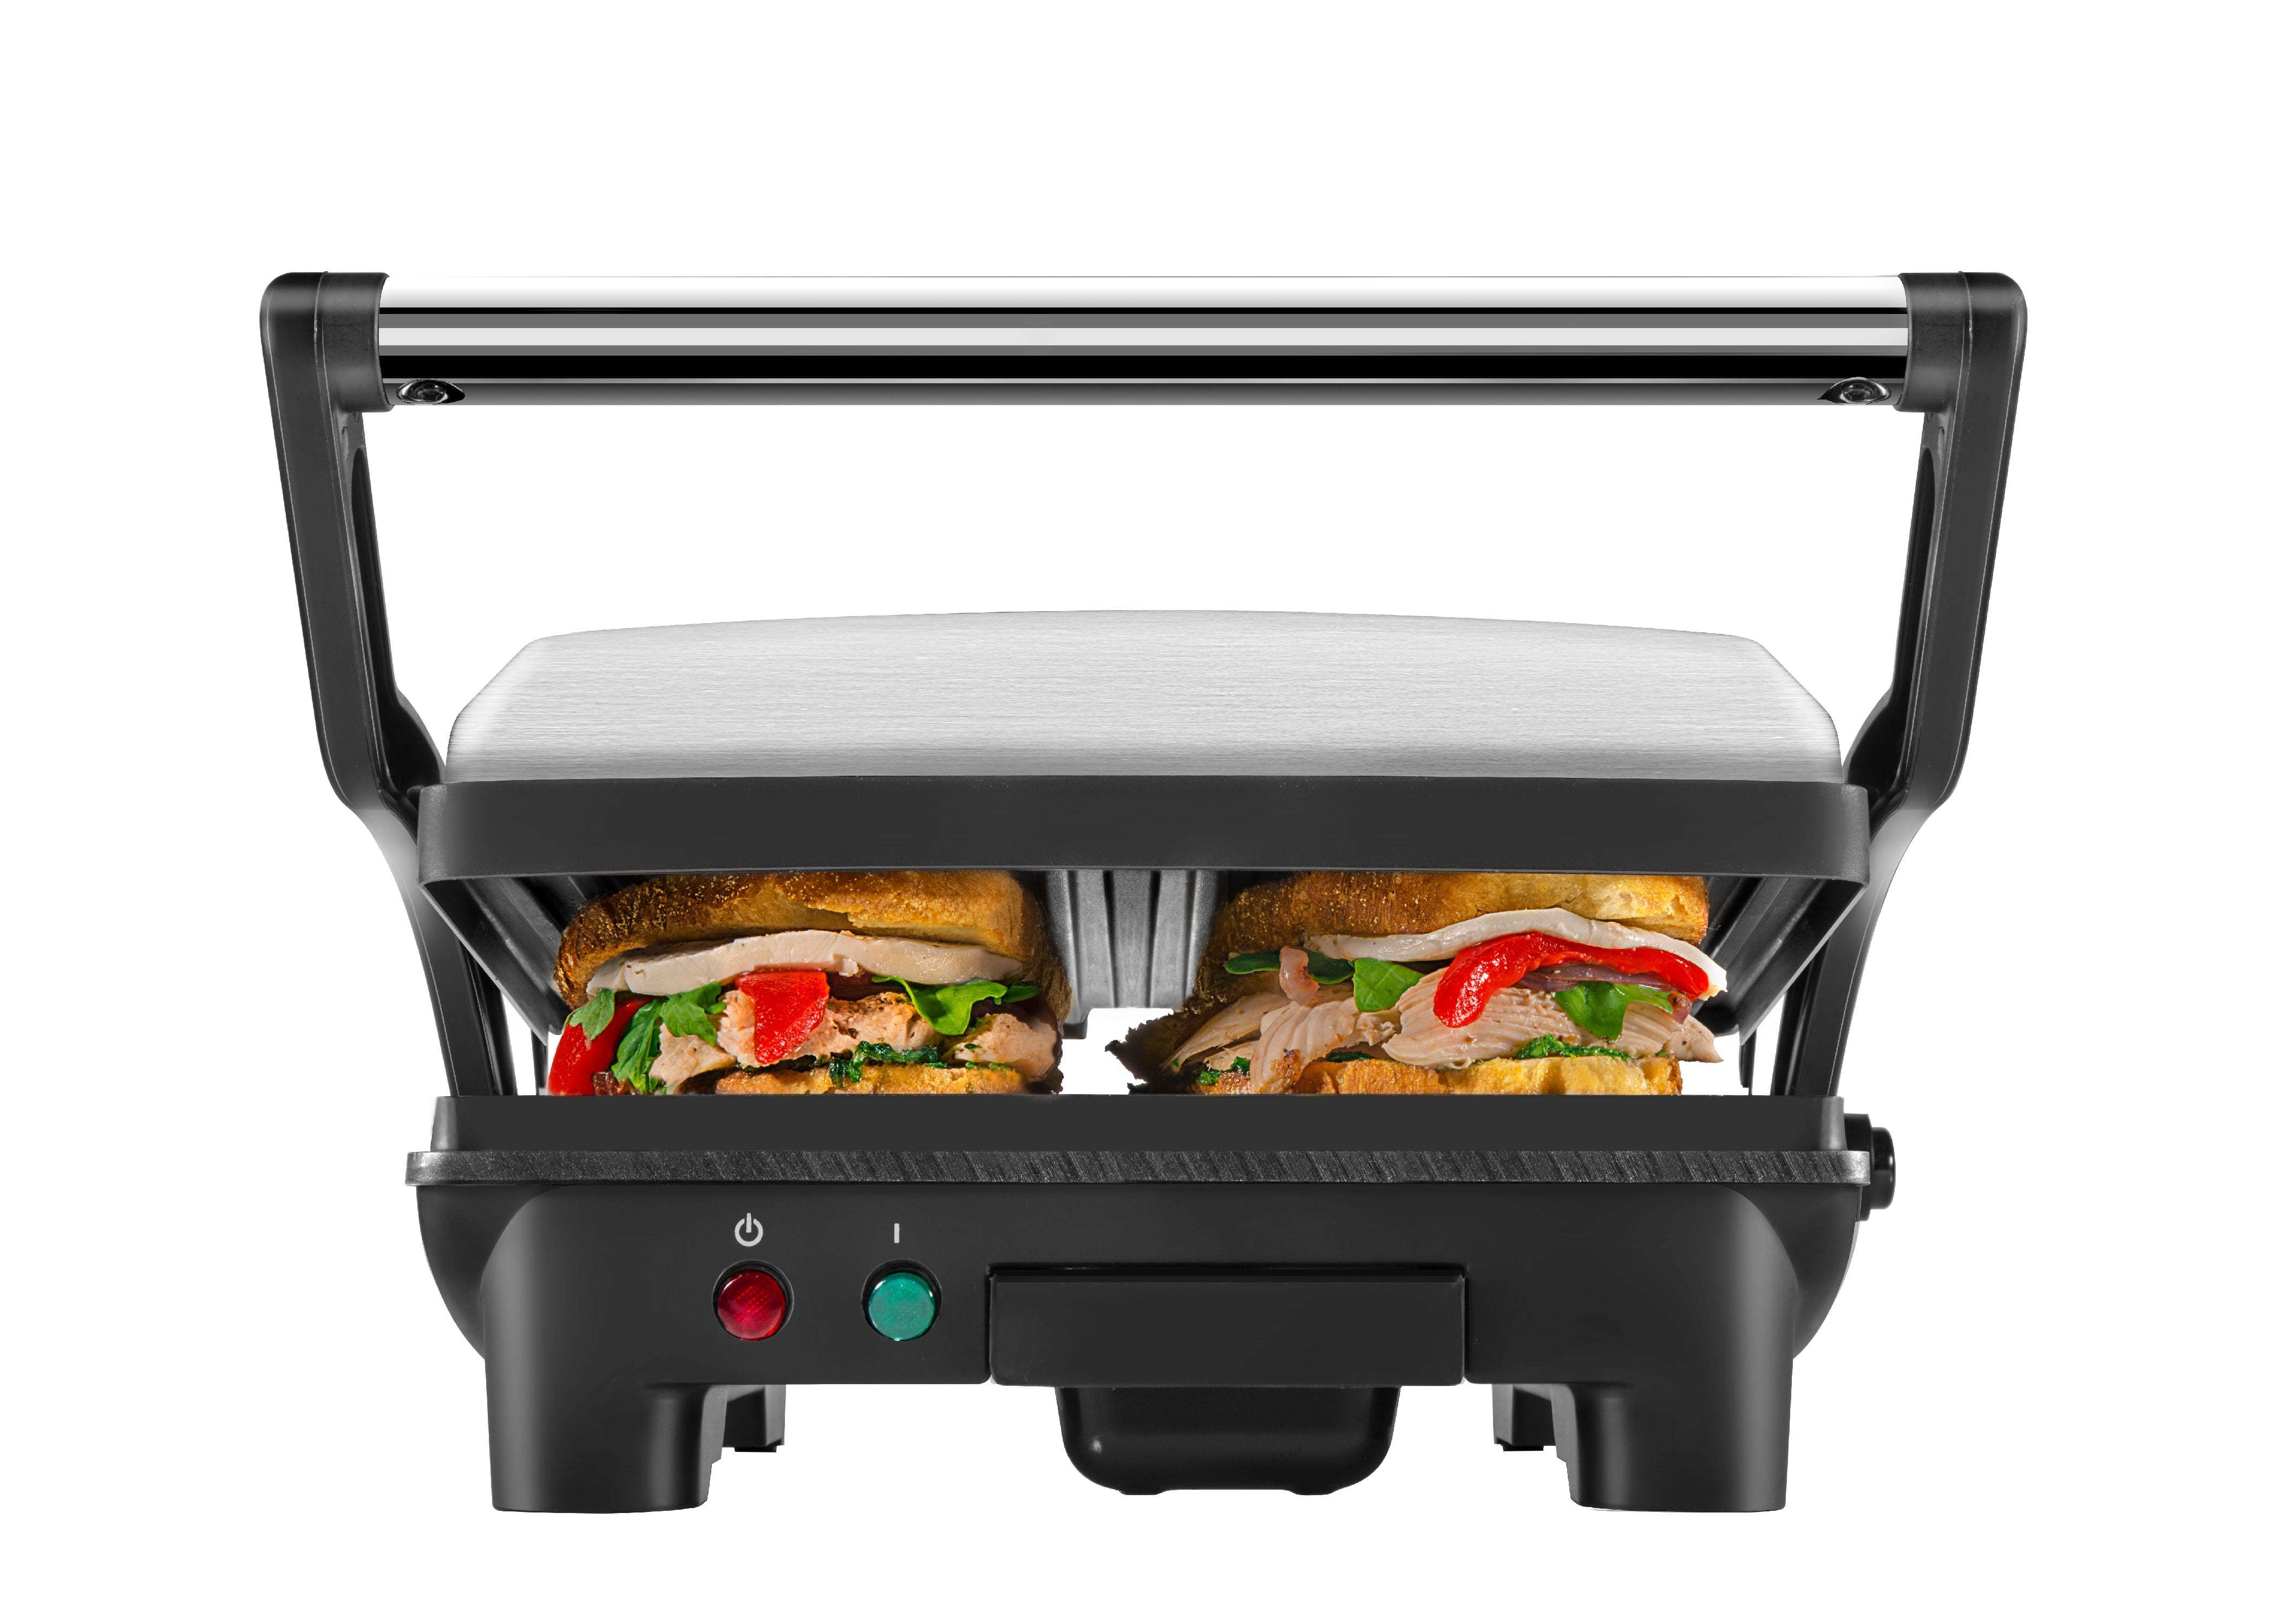 5 in 1 Indoor Grill, Panini Press Grill Sandwich Maker, CATTLEMAN CUISINE  Electric Contact Grill and Griddle, Smart Probe, LCD Display, Stainless